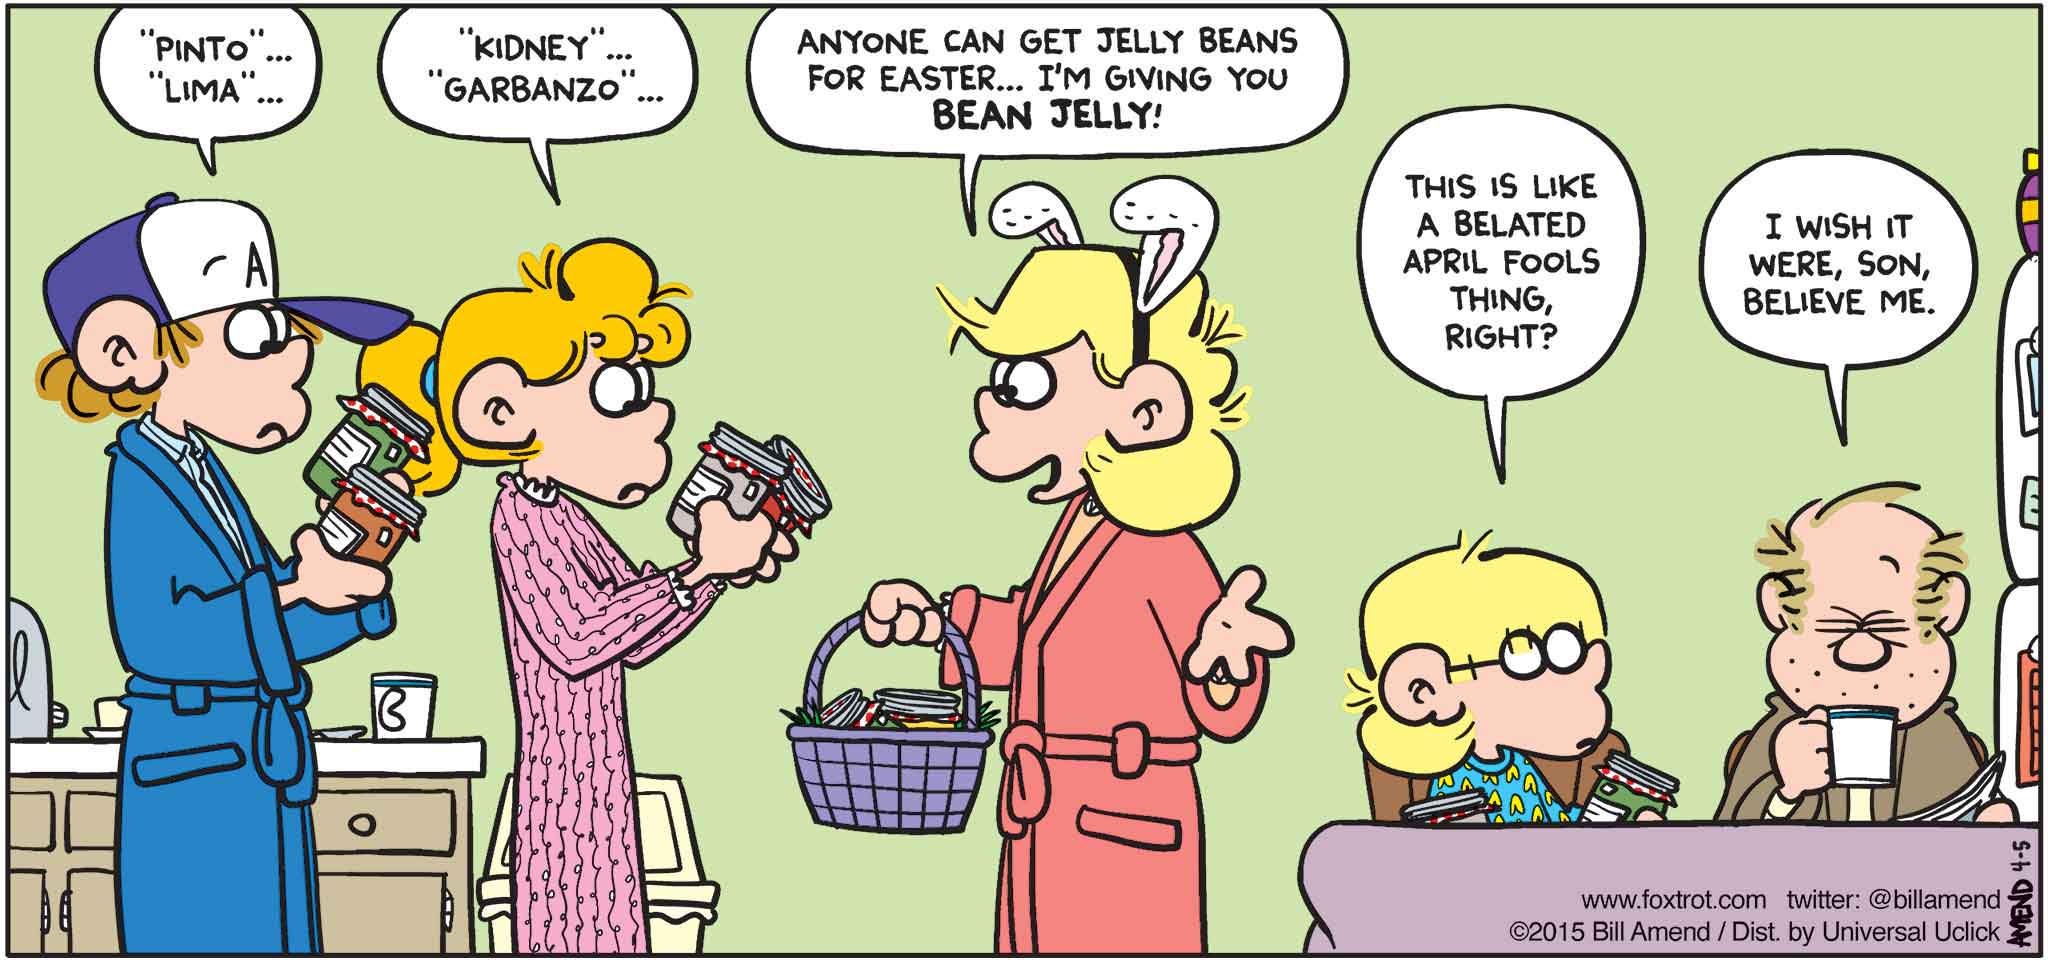 FoxTrot by Bill Amend - "Jelly Jarred" published April 5, 2015 - Peter: "Pinto" ... "Lima" ... Paige: "Kidney" ... "Garbanzo" ... Andy: Anyone can get jelly beans for Easter... I'm giving you BEAN JELLY! Jason: This is like a belated April Fools thing, right? Roger: I wish it were, son. Believe me. 